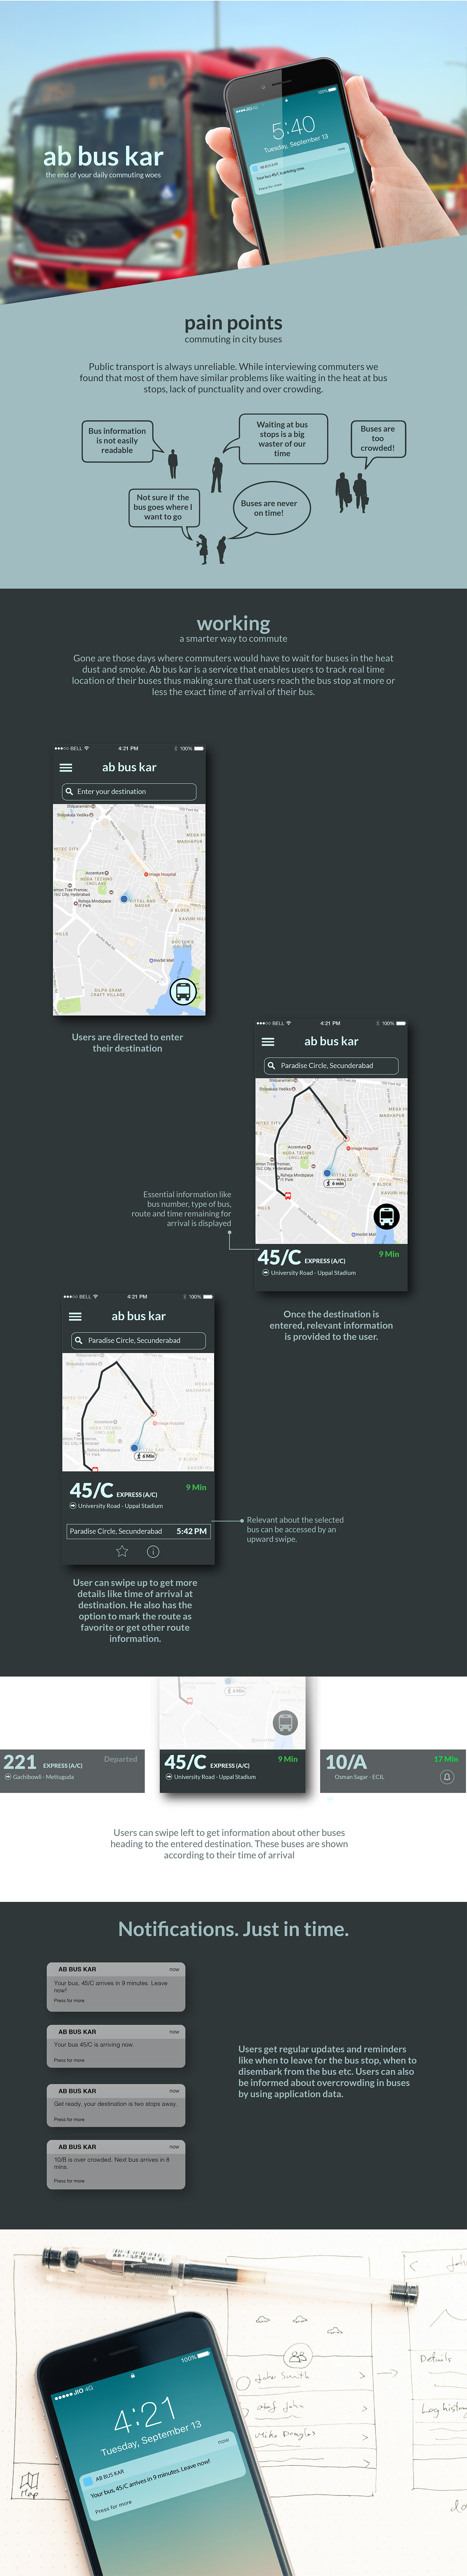 Interaction design  bus service internet of things